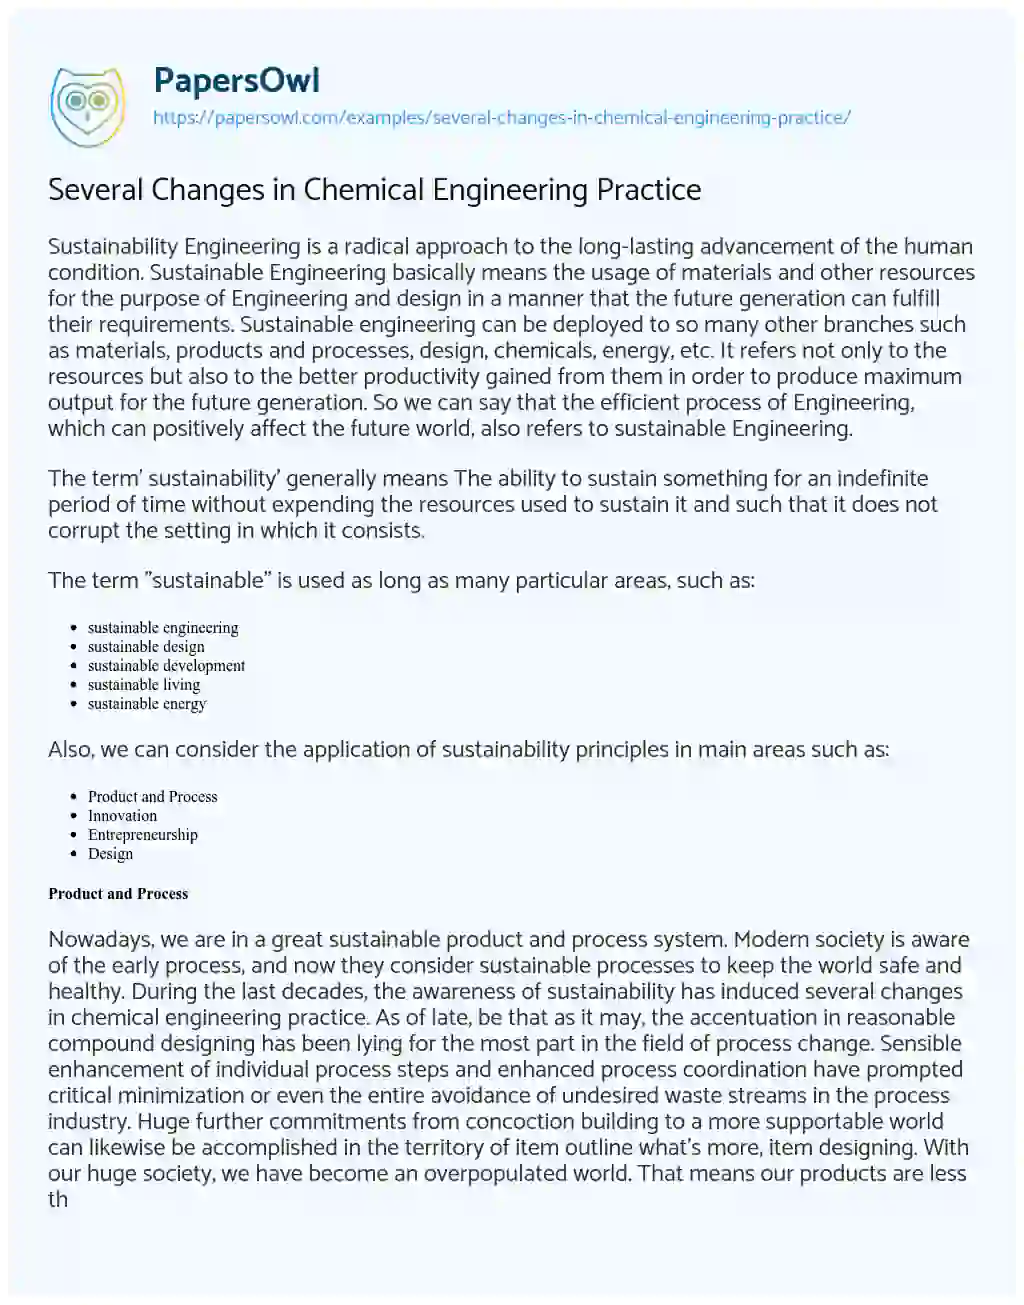 Essay on Several Changes in Chemical Engineering Practice